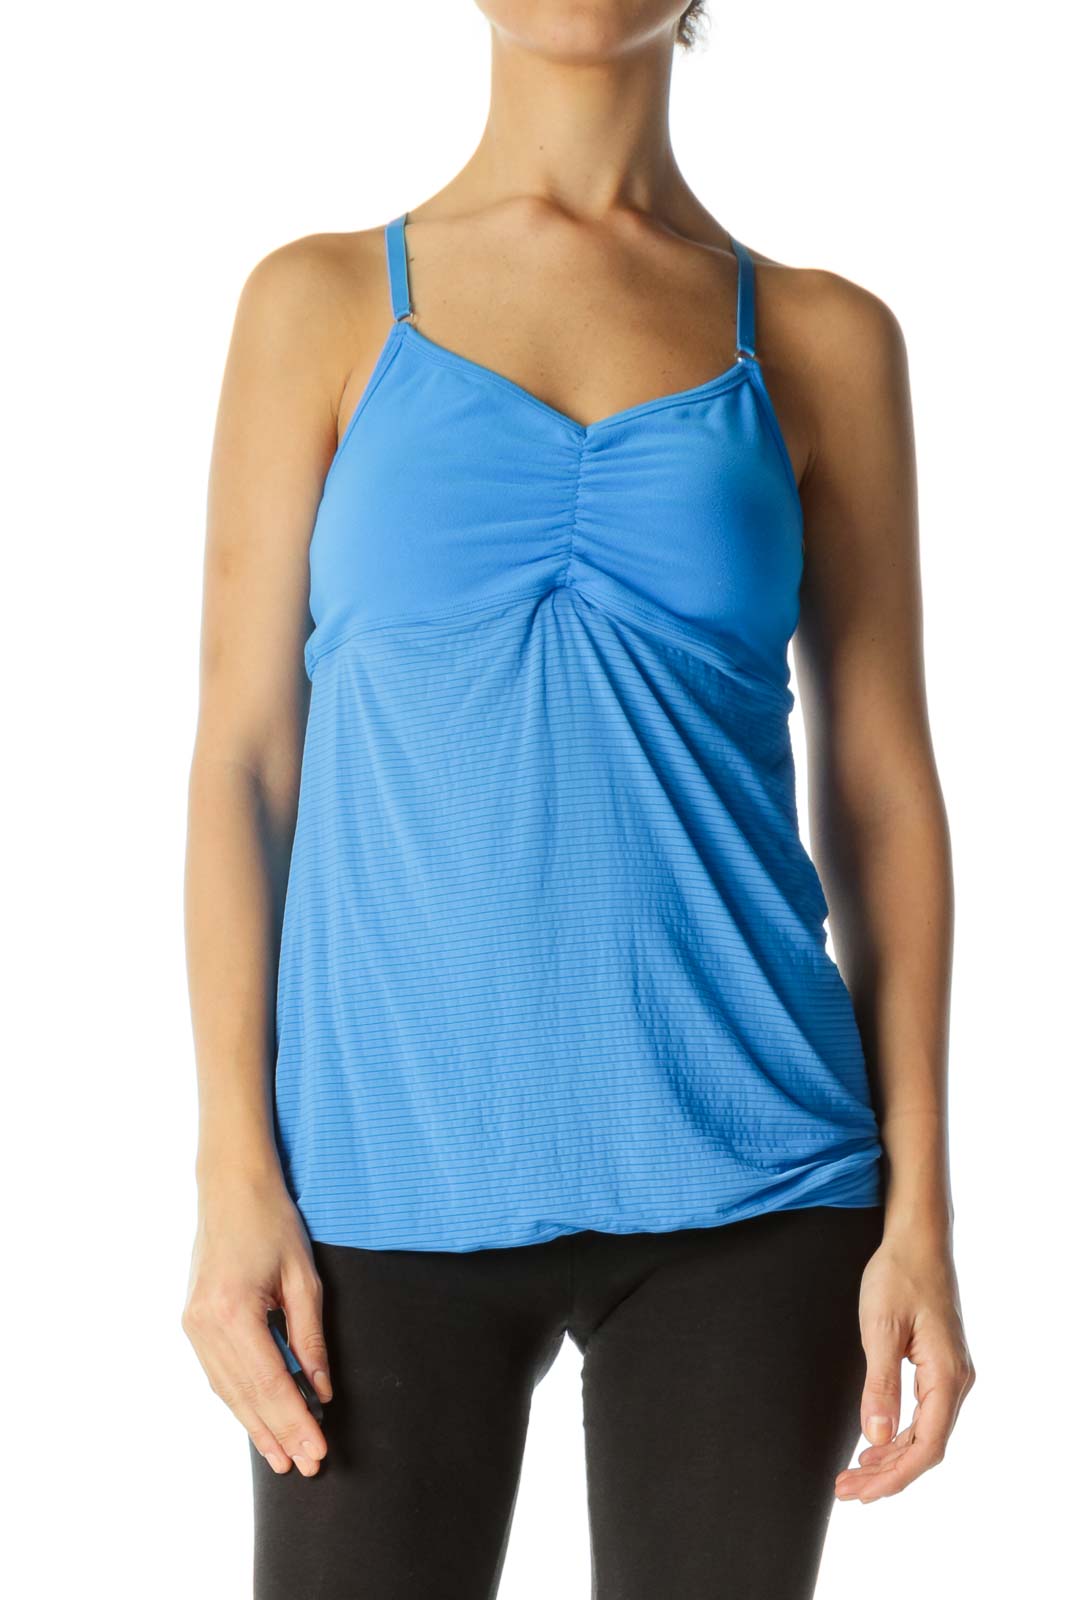 Blue Open-Back Mixed-Media Spaghetti-Strap Active-Wear Tank Front